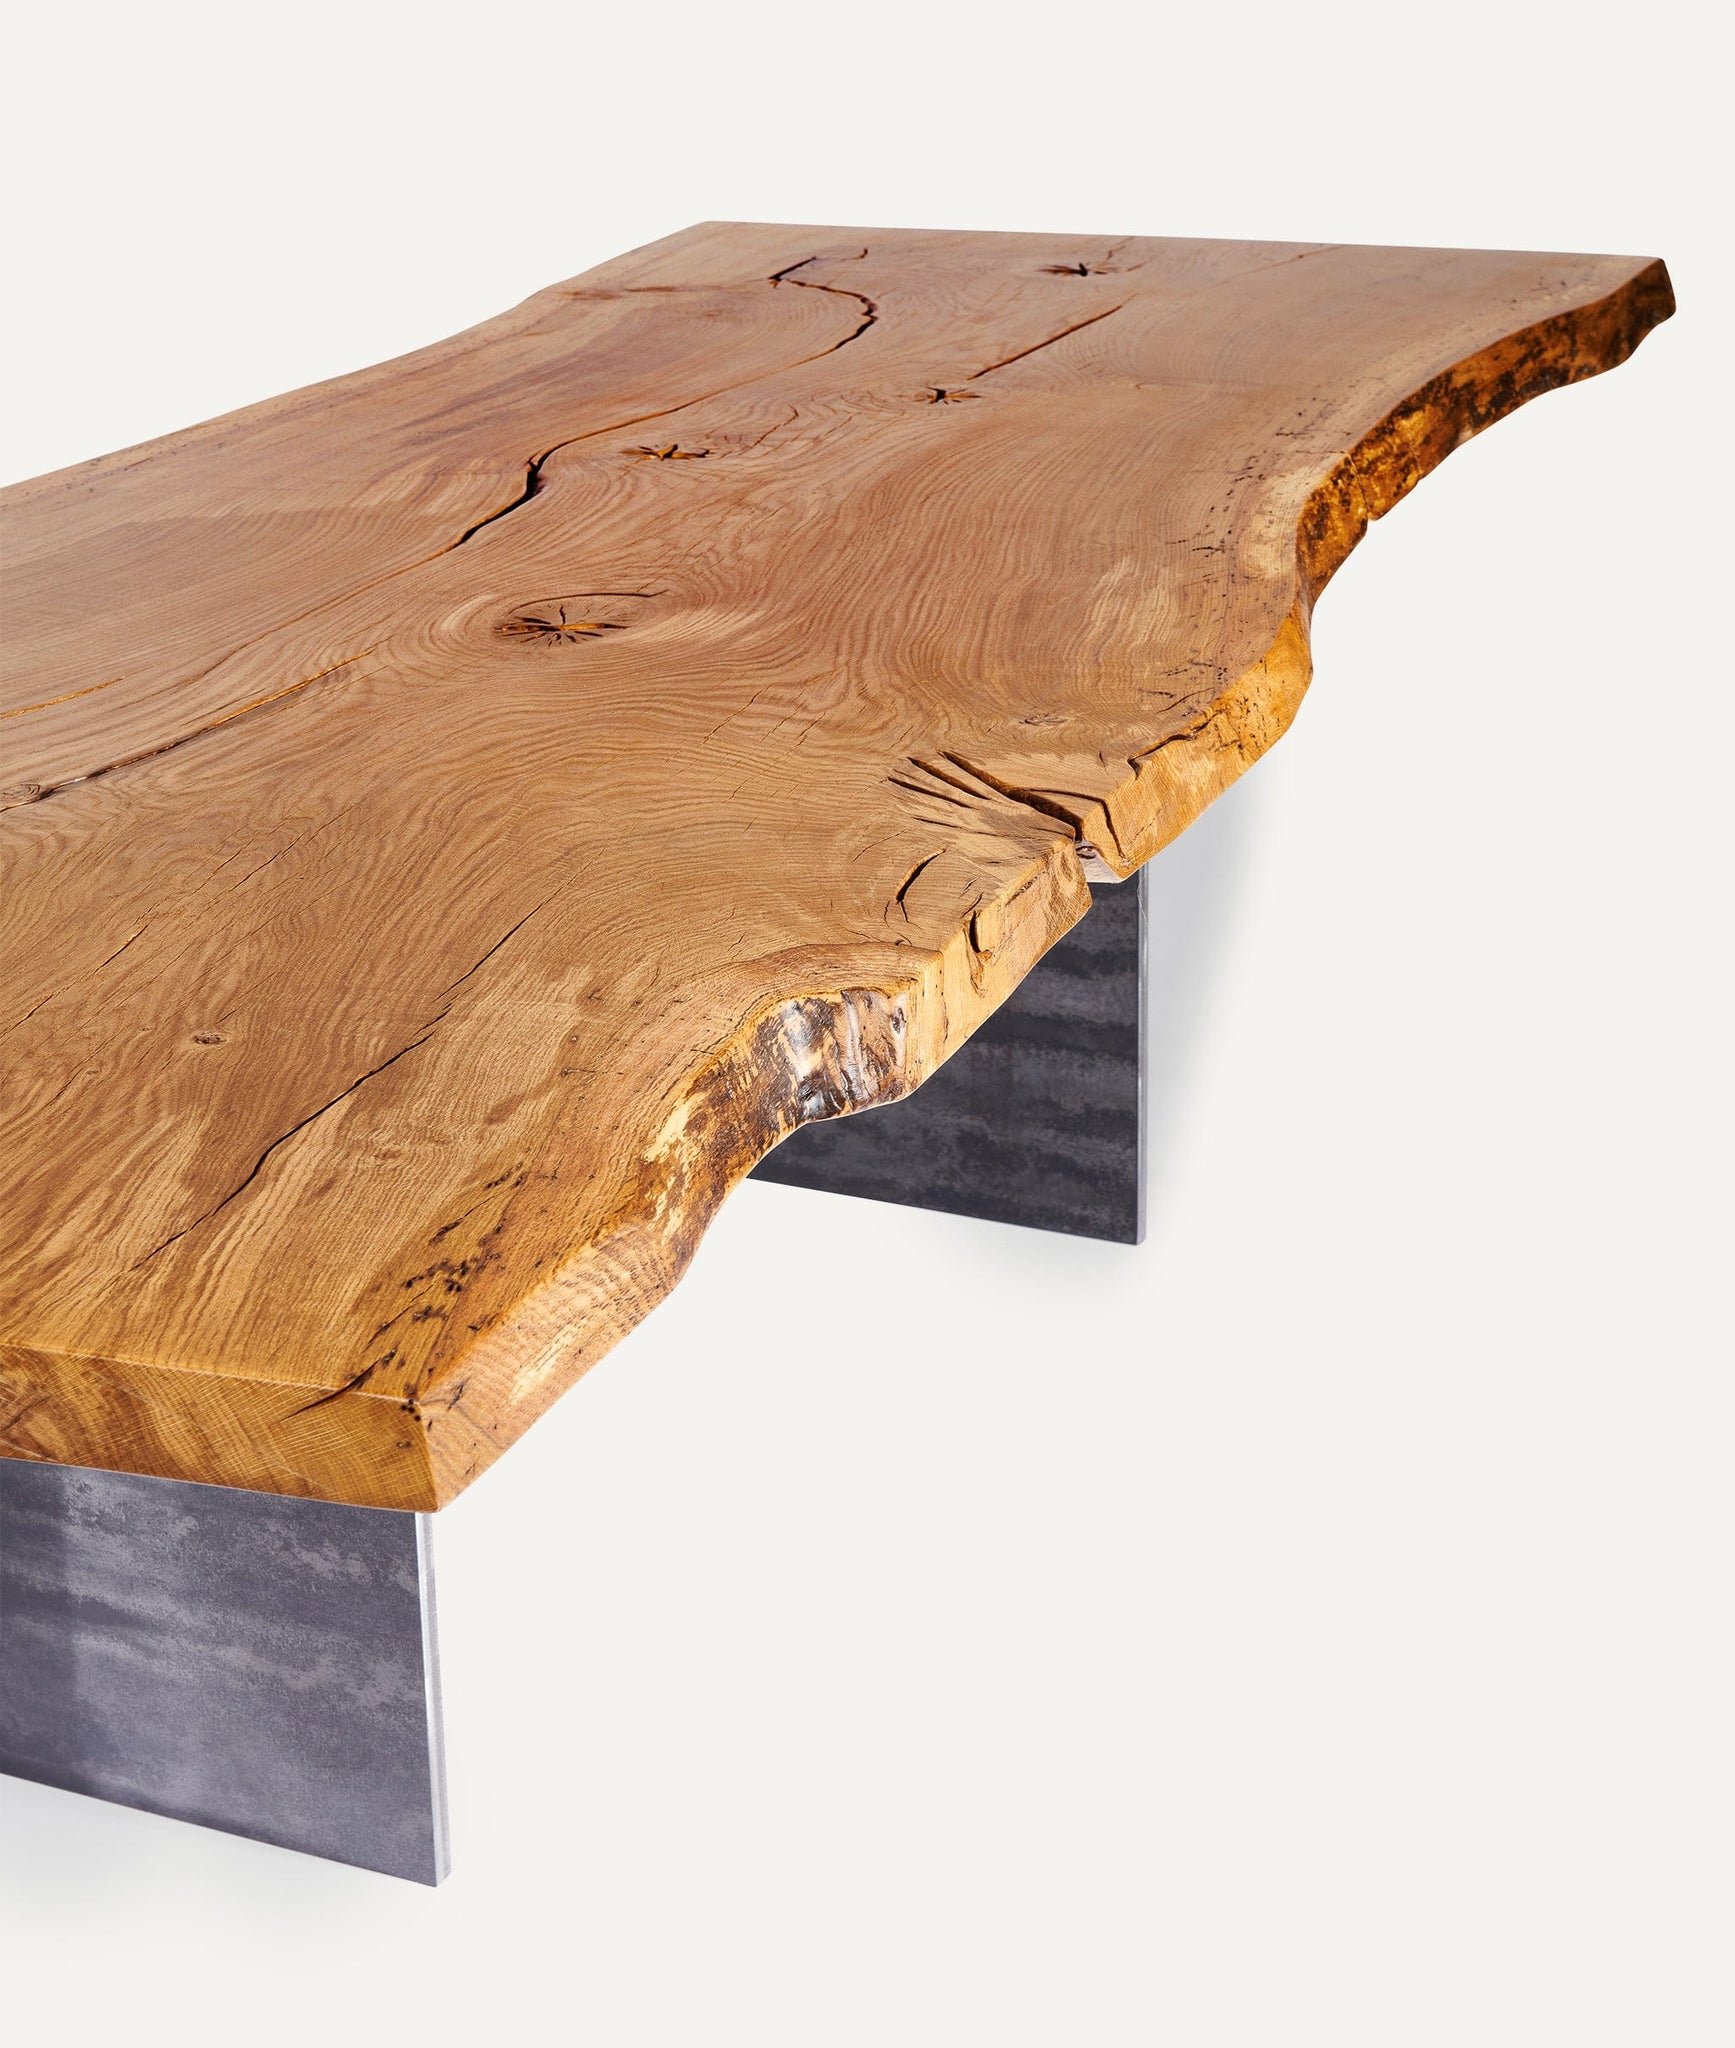 Solid Wood Table in Oak with Steel Plate Base (live edge)